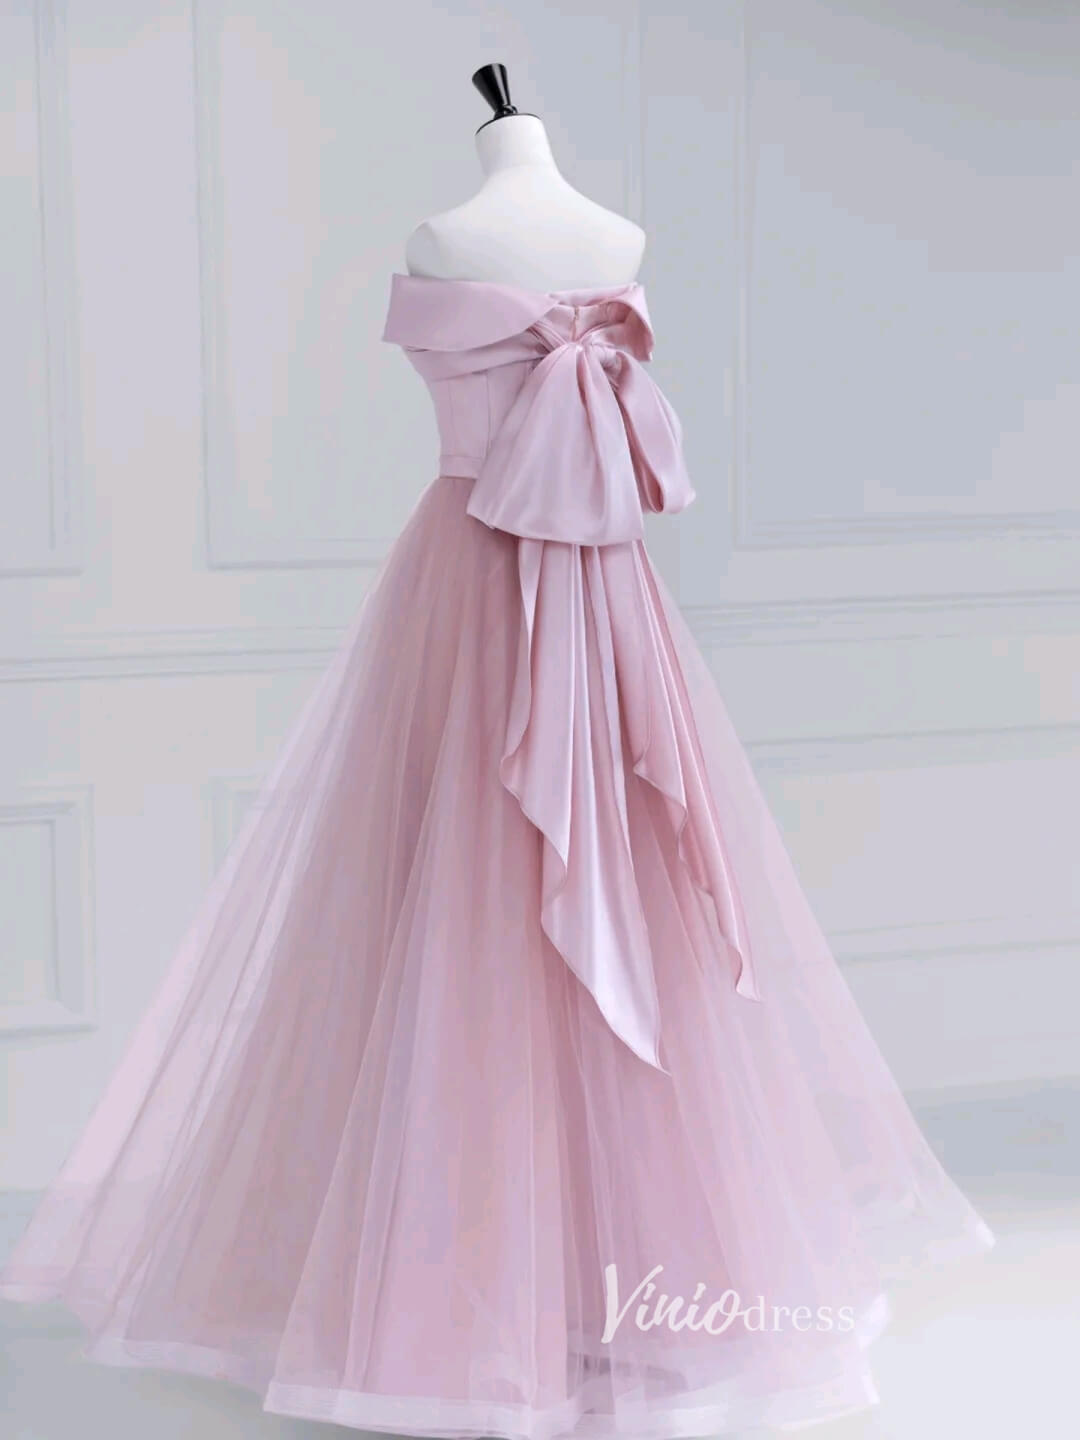 Pink Off the Shoulder Prom Dresses Bow-Tie Formal Dress AD1037-prom dresses-Viniodress-Viniodress